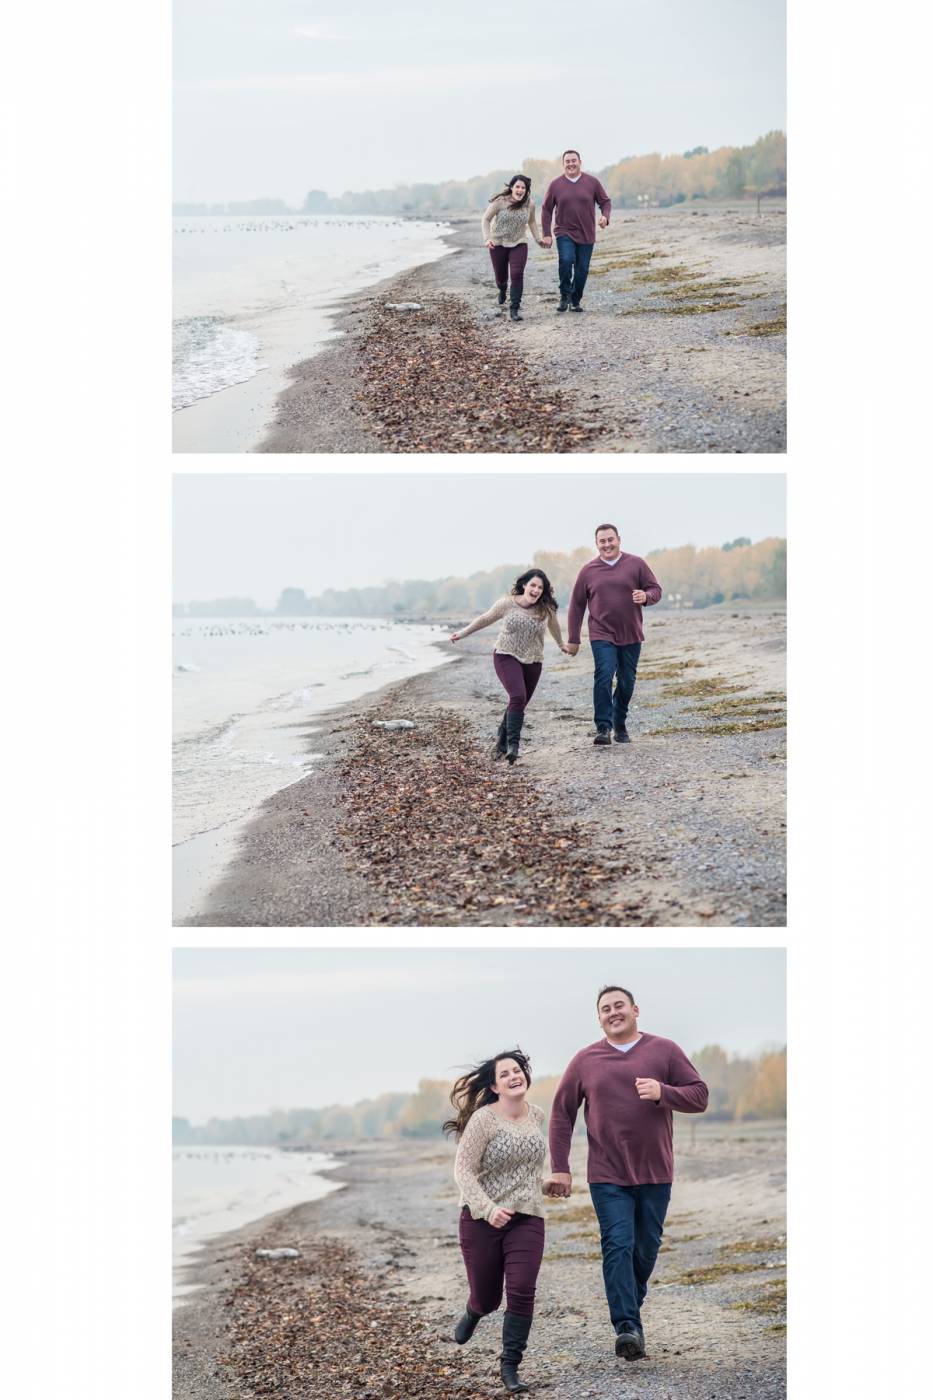 Fun Engagement Pictures